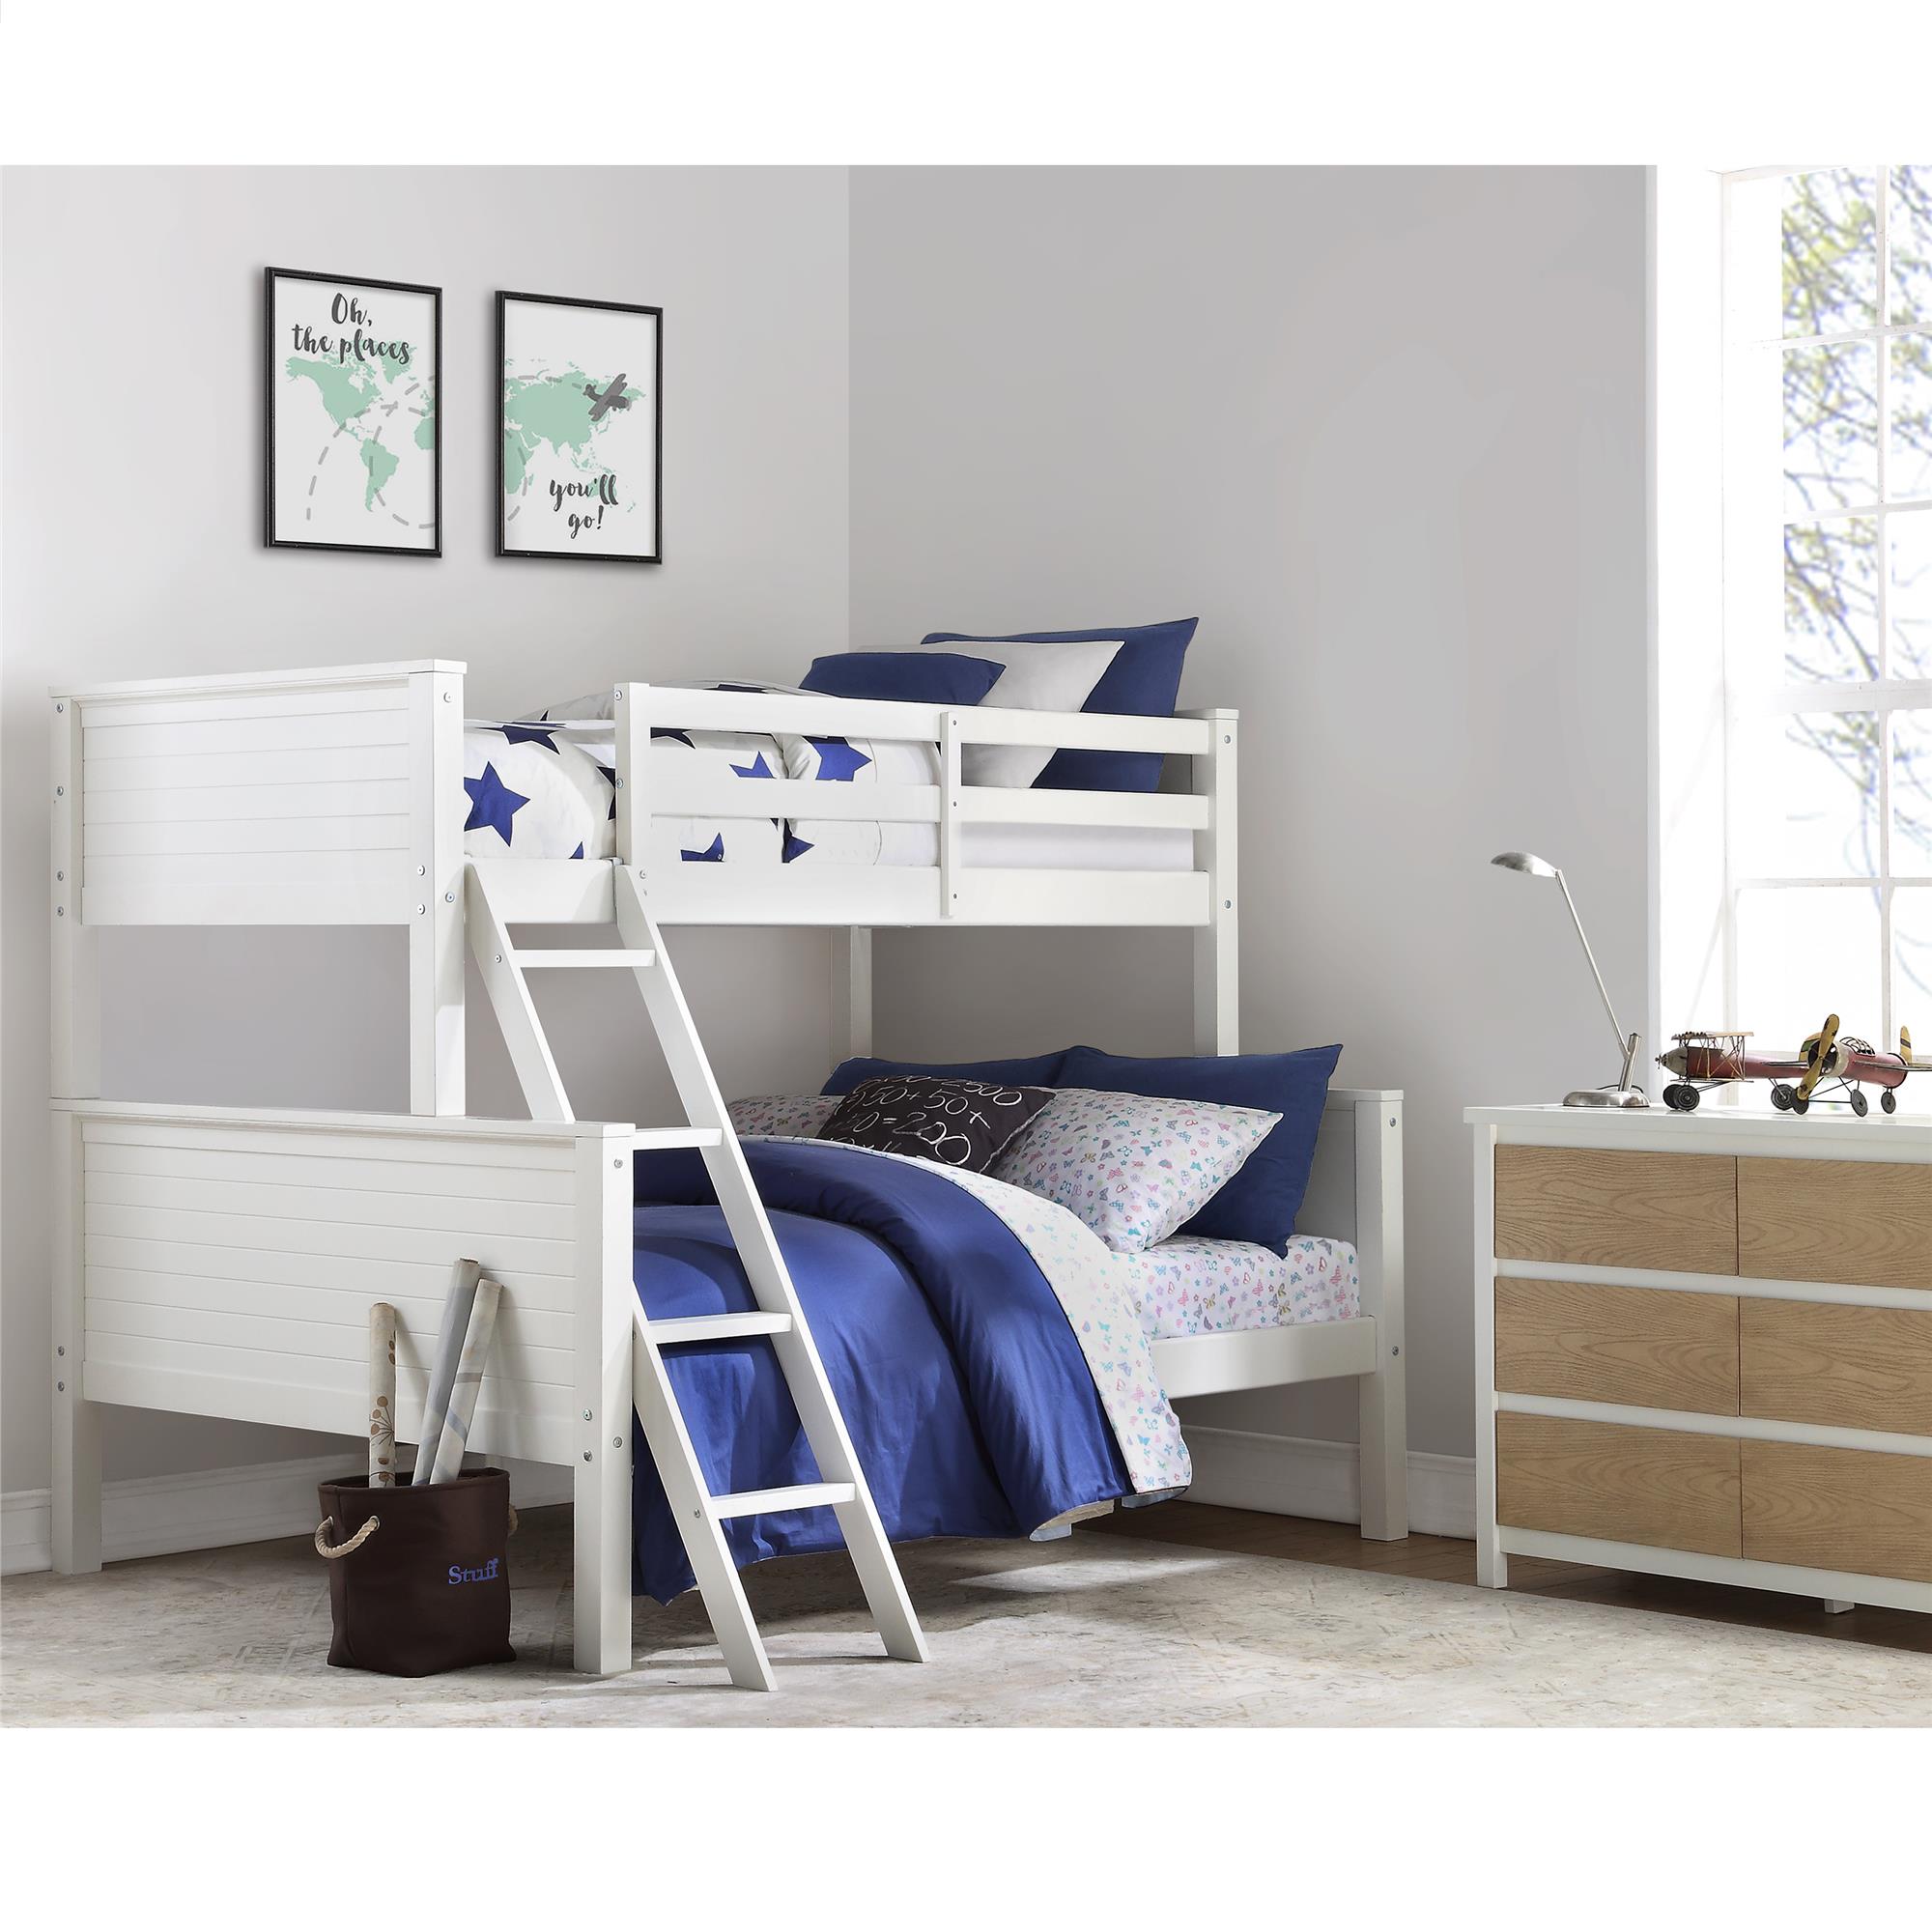 Mainstays Premium Twin Over Full Bunk Bed, Mainstays Bunk Bed Twin Over Full